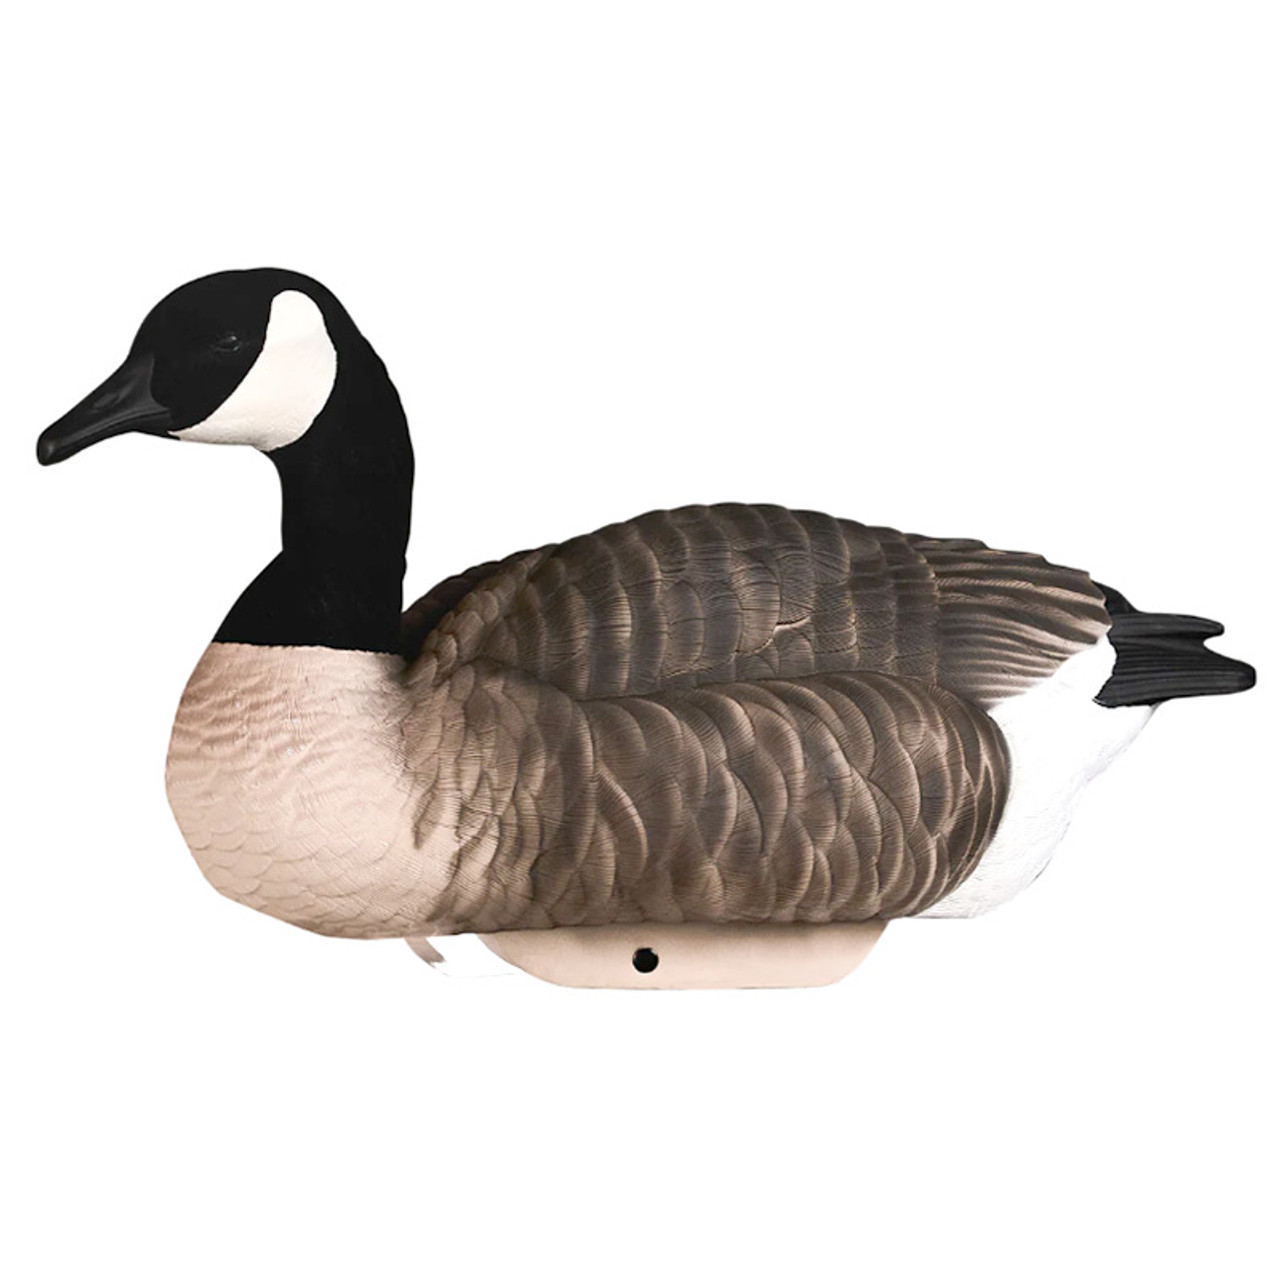 Active - HydroFoam Flocked Head Canada Geese 4-Pack Goose Decoys by Heyday